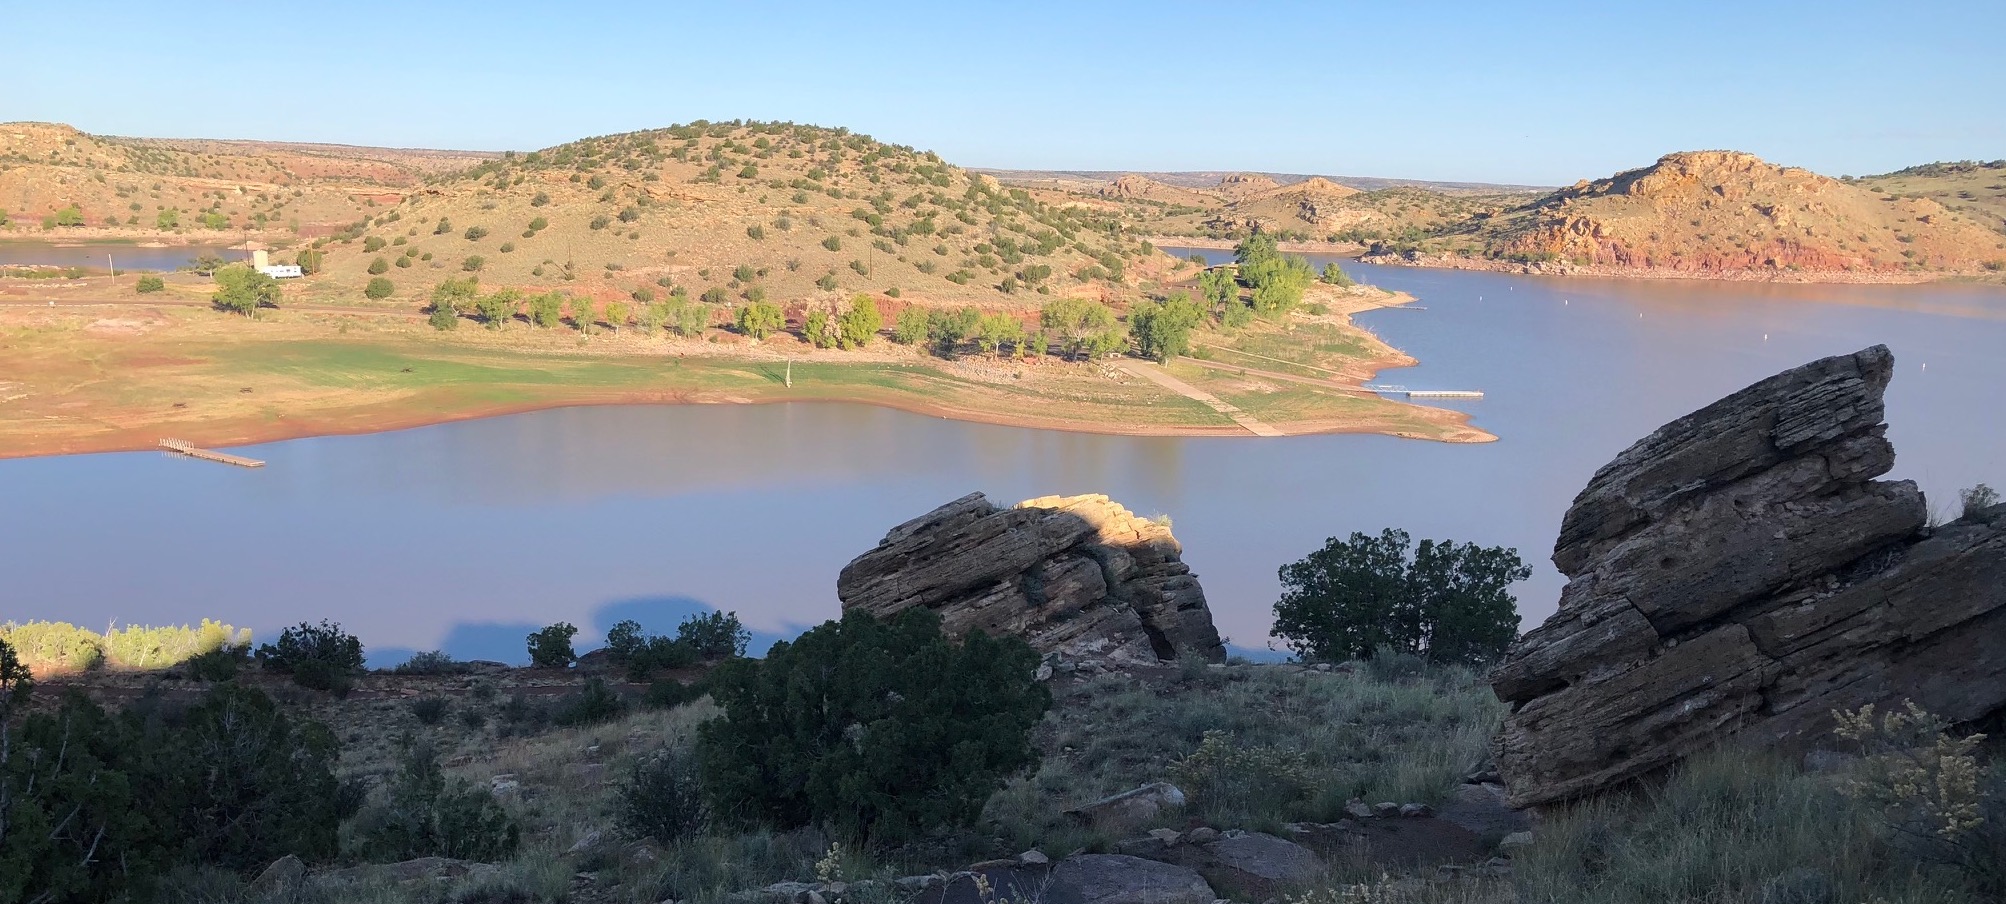 An overview of Lyman Lake, with rocks outlined in the foreground